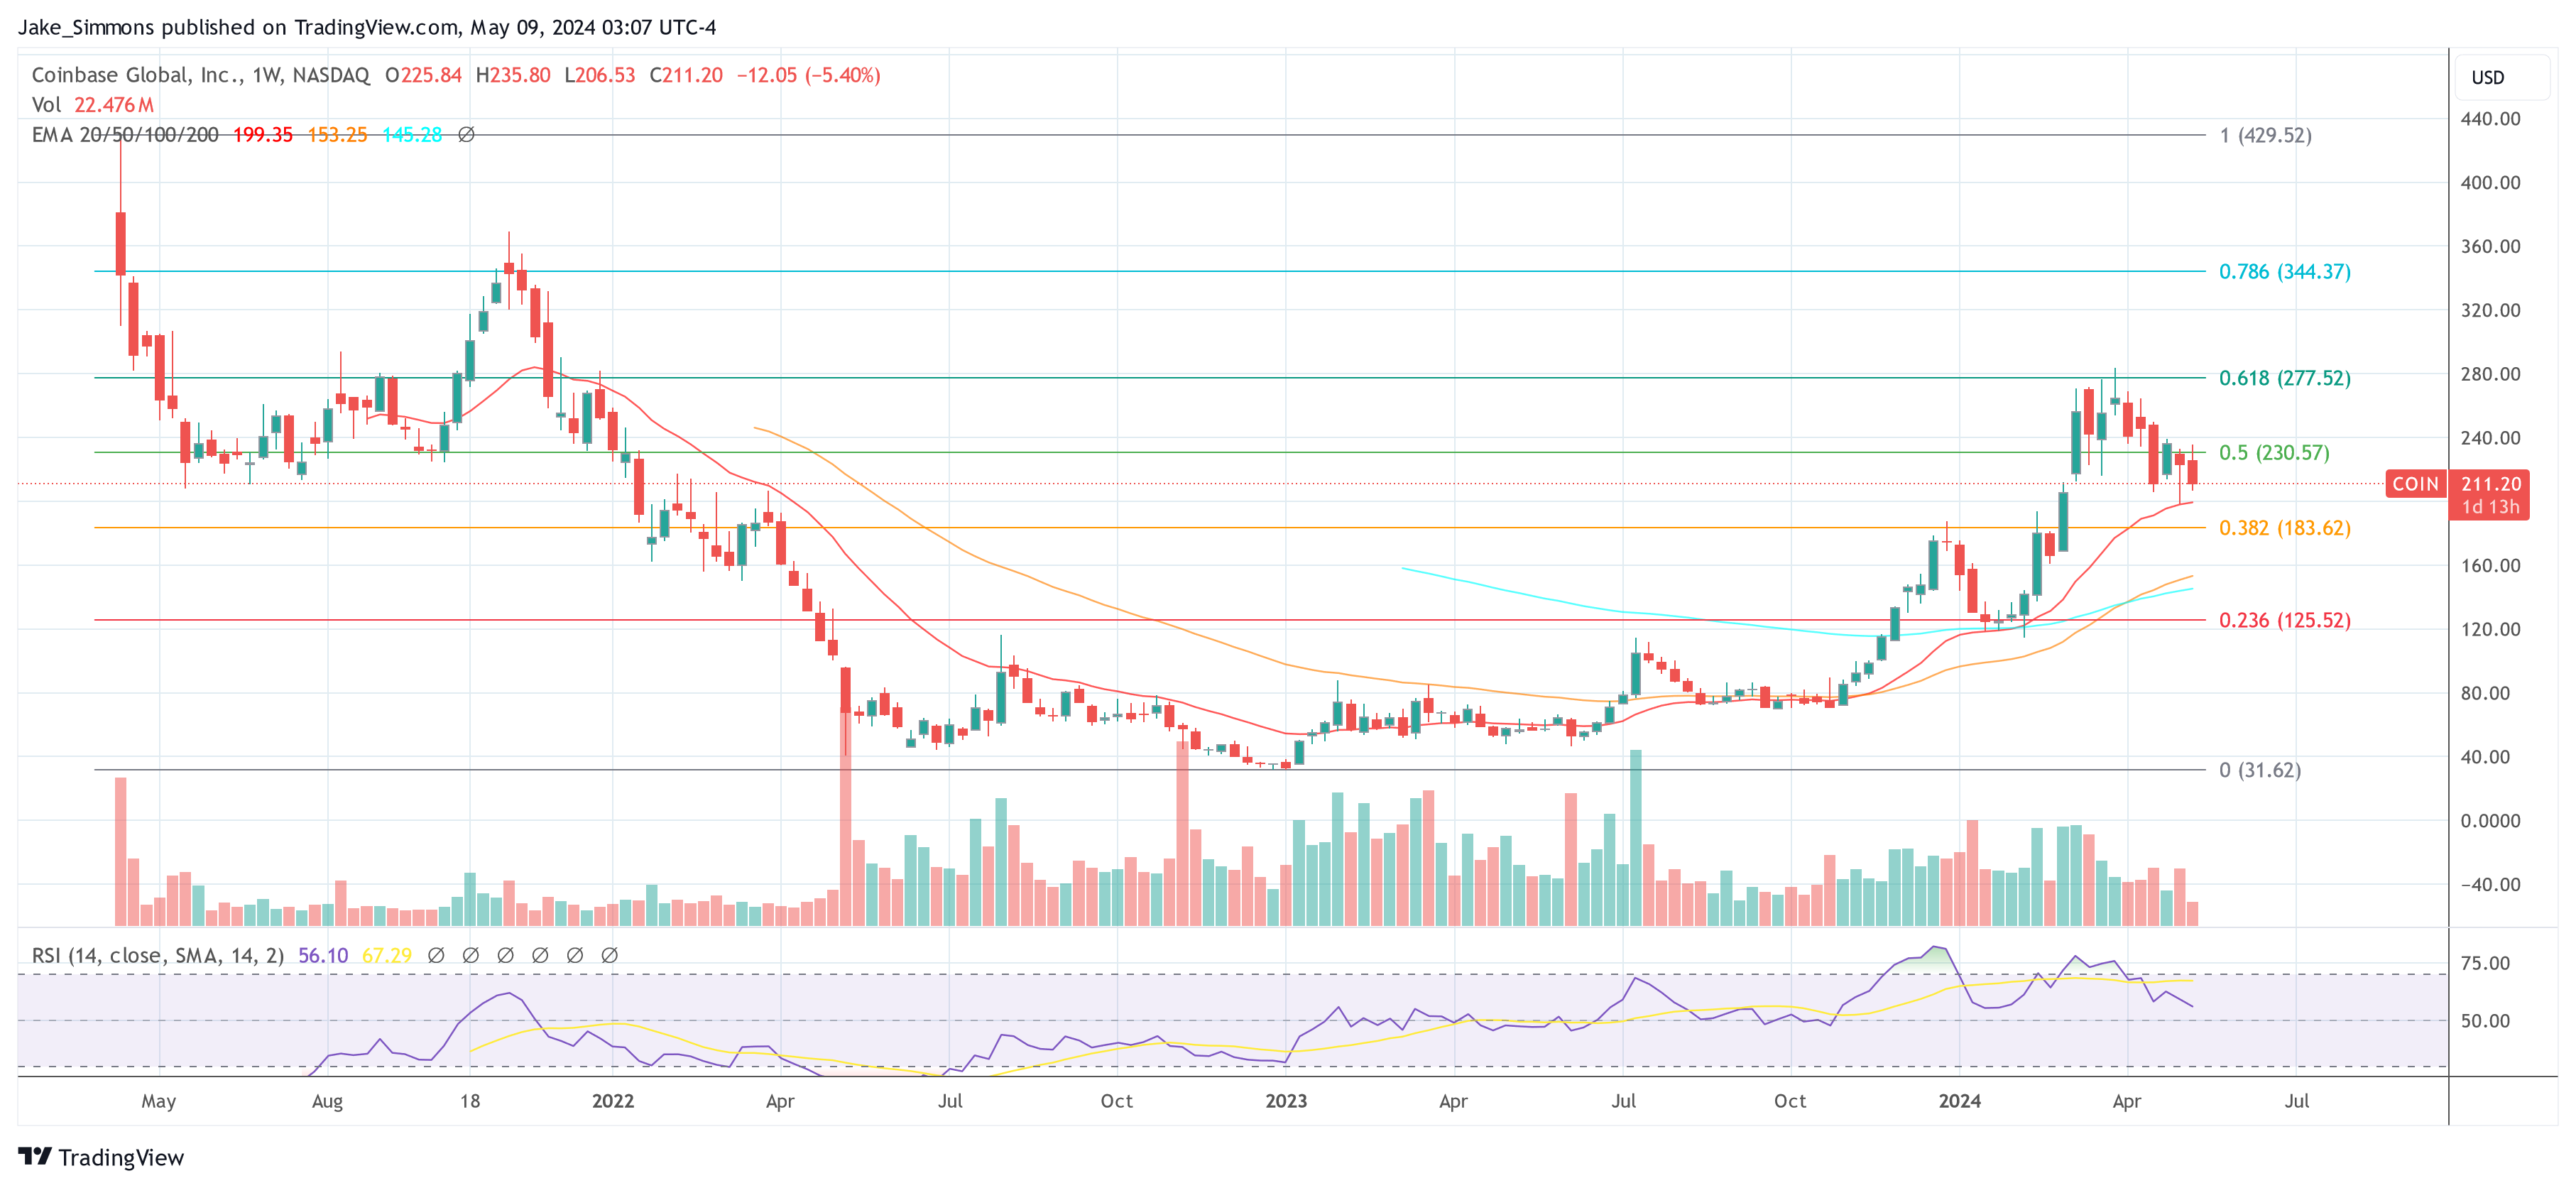 Bitwise Heralds Coinbase (COIN) As The ‘Next Amazon’: Price Targets